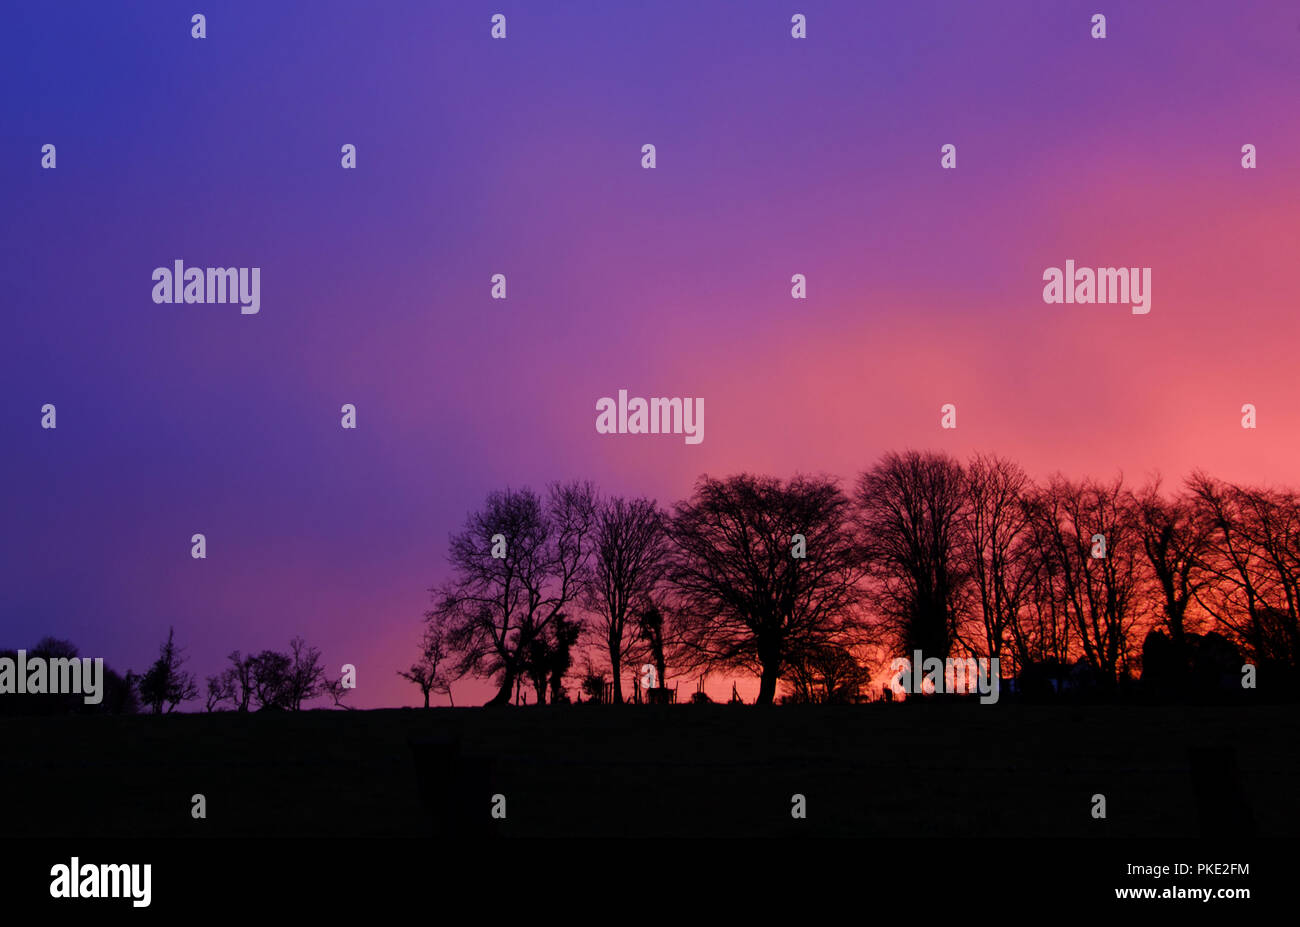 Colourful Sunrise with Tree silhouettes Stock Photo